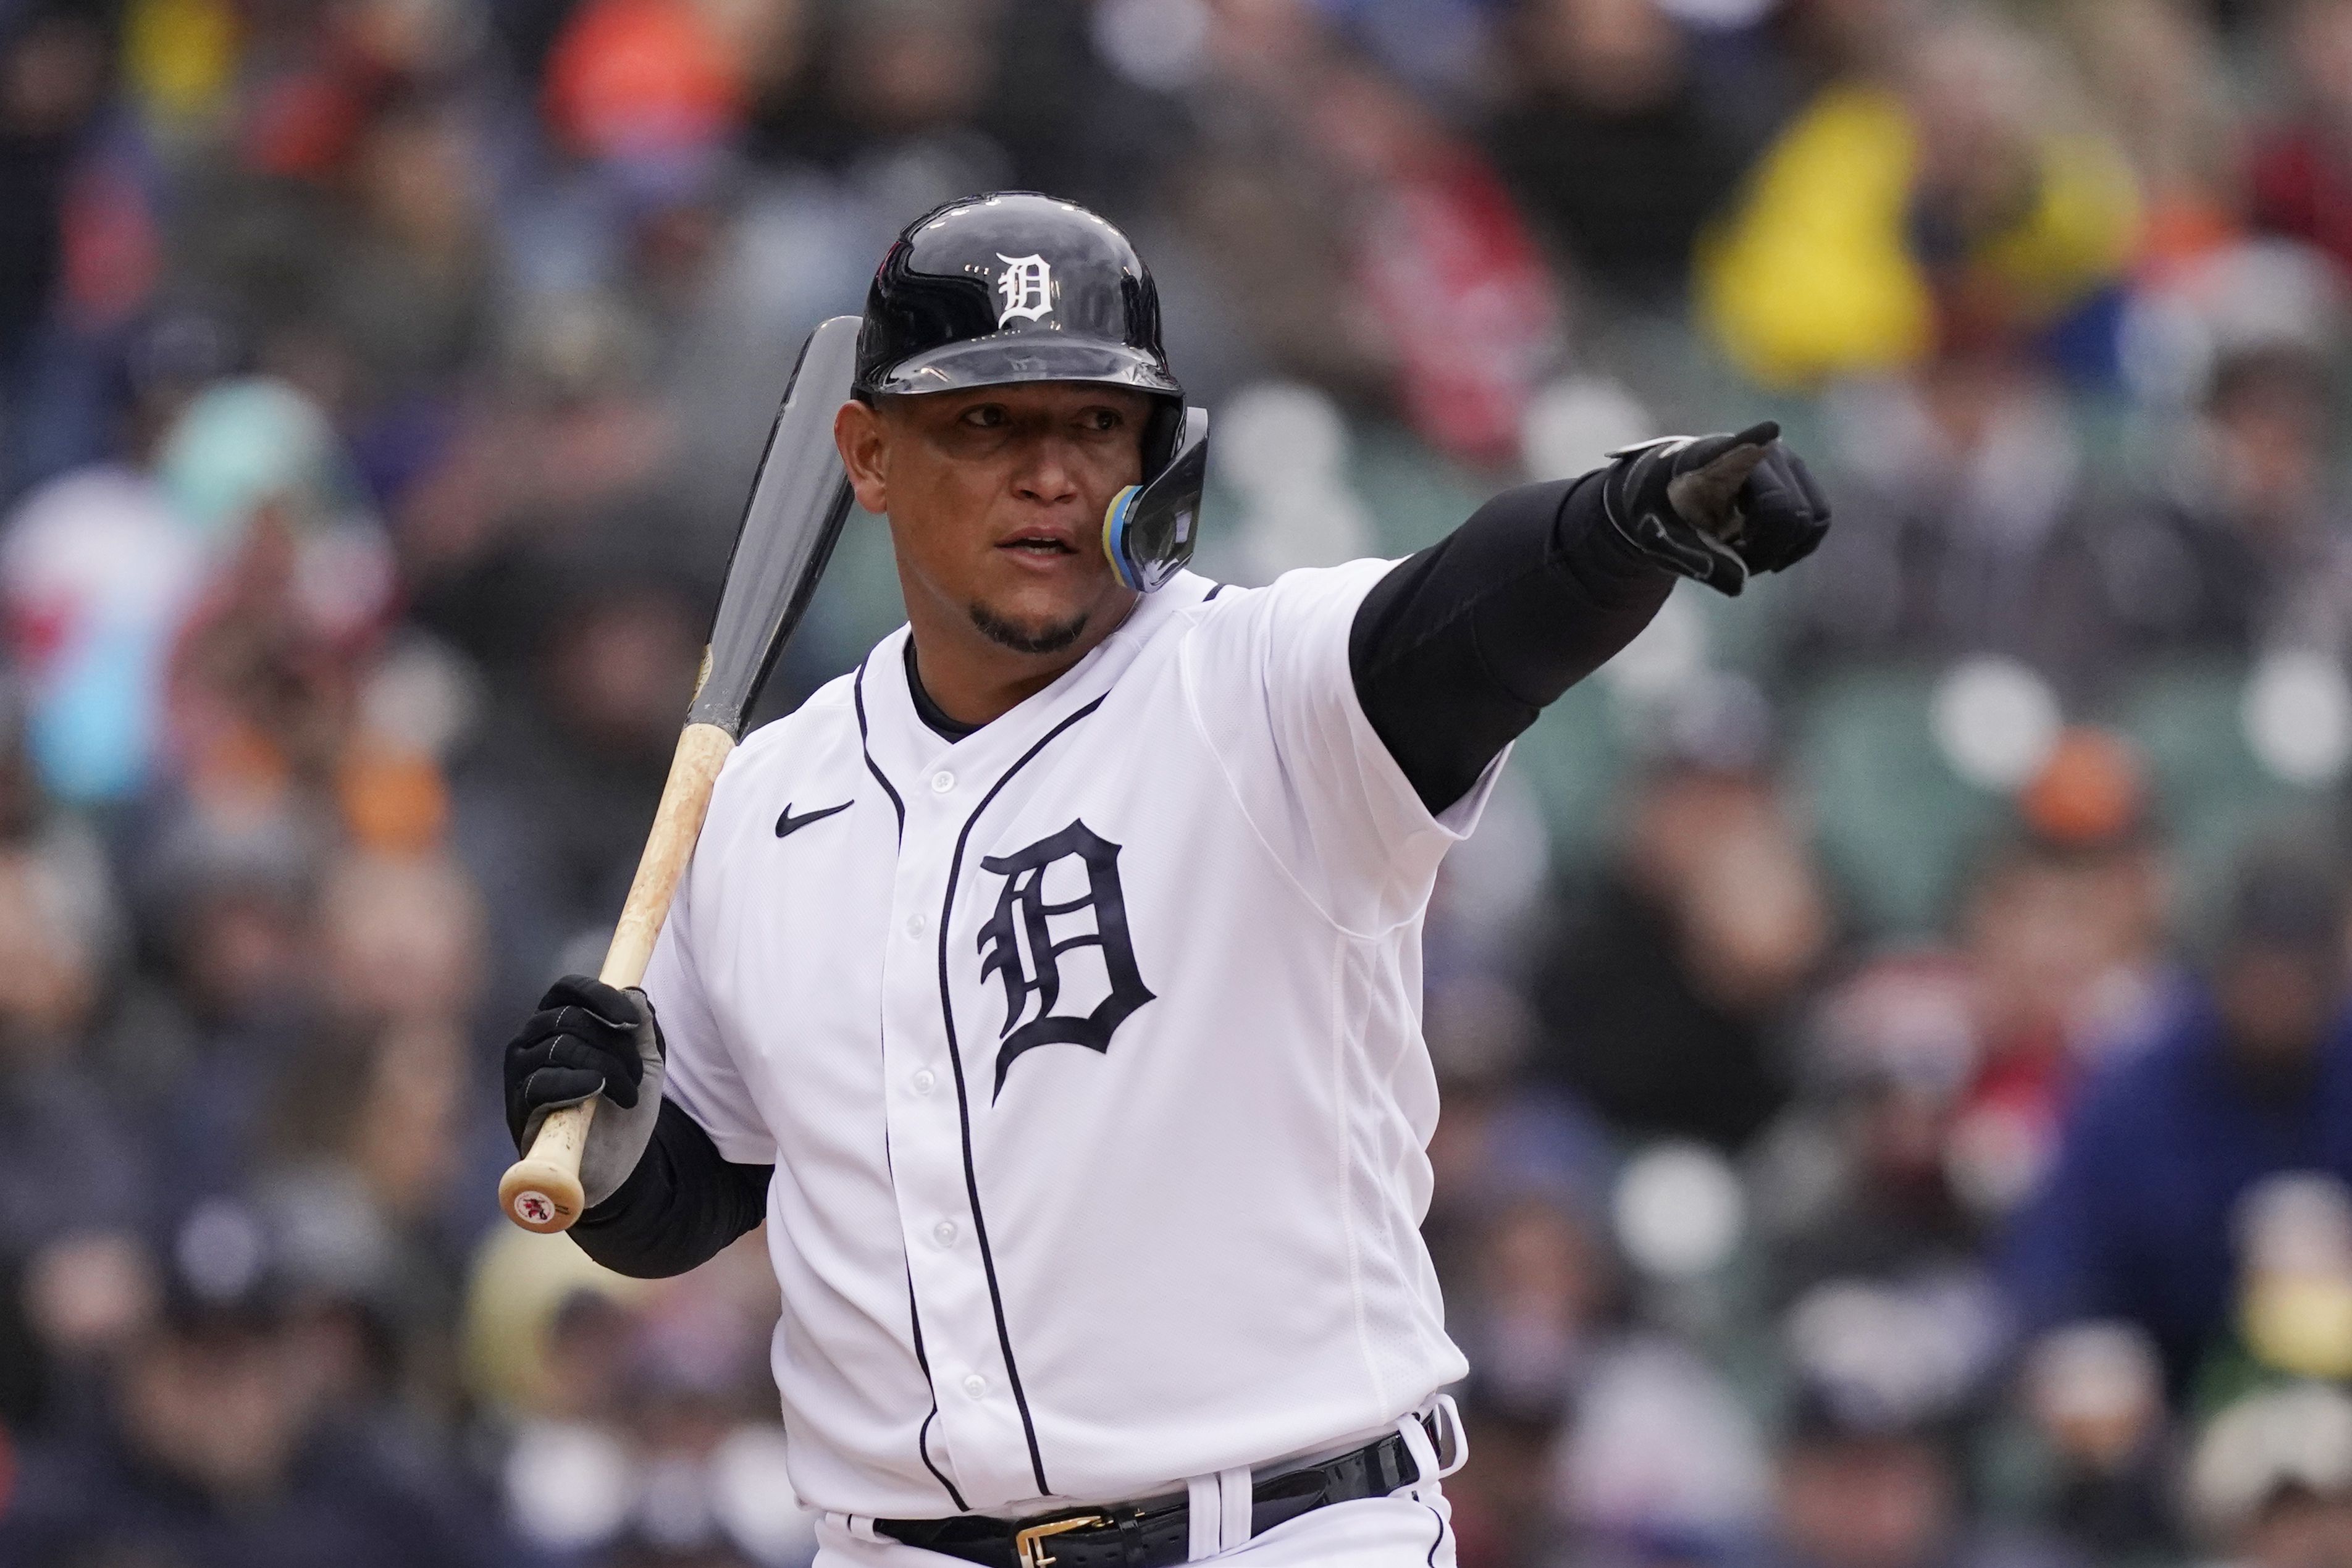 History on hold: Cabrera's chase for 3,000th hit washed out - The